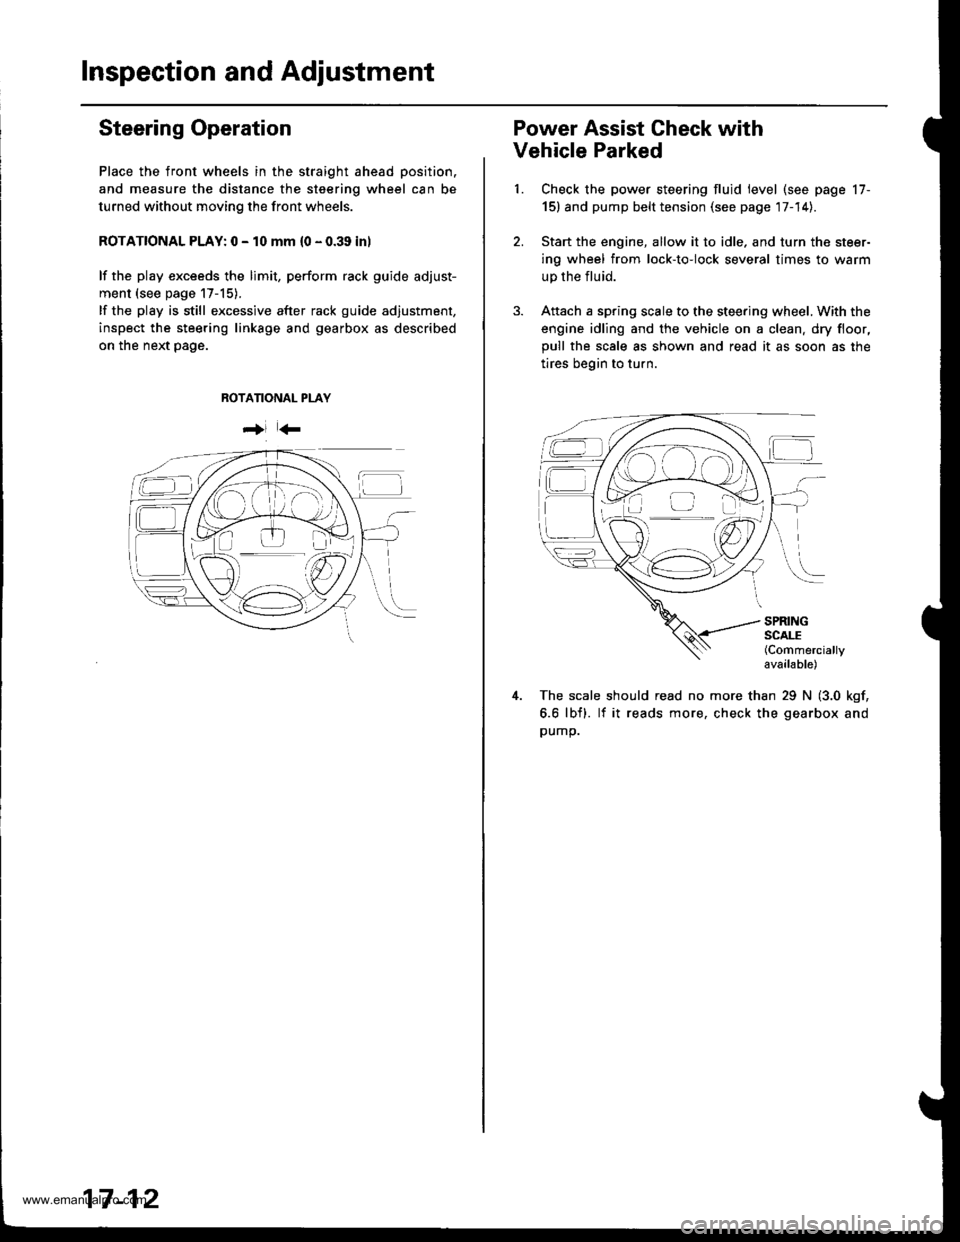 HONDA CR-V 1997 RD1-RD3 / 1.G Workshop Manual 
Inspection and Adjustment
Steering Operation
Place the front wheels in the straight ahead position.
and measure the distance the steering wheel can be
turned without moving the front wheels.
ROTATION